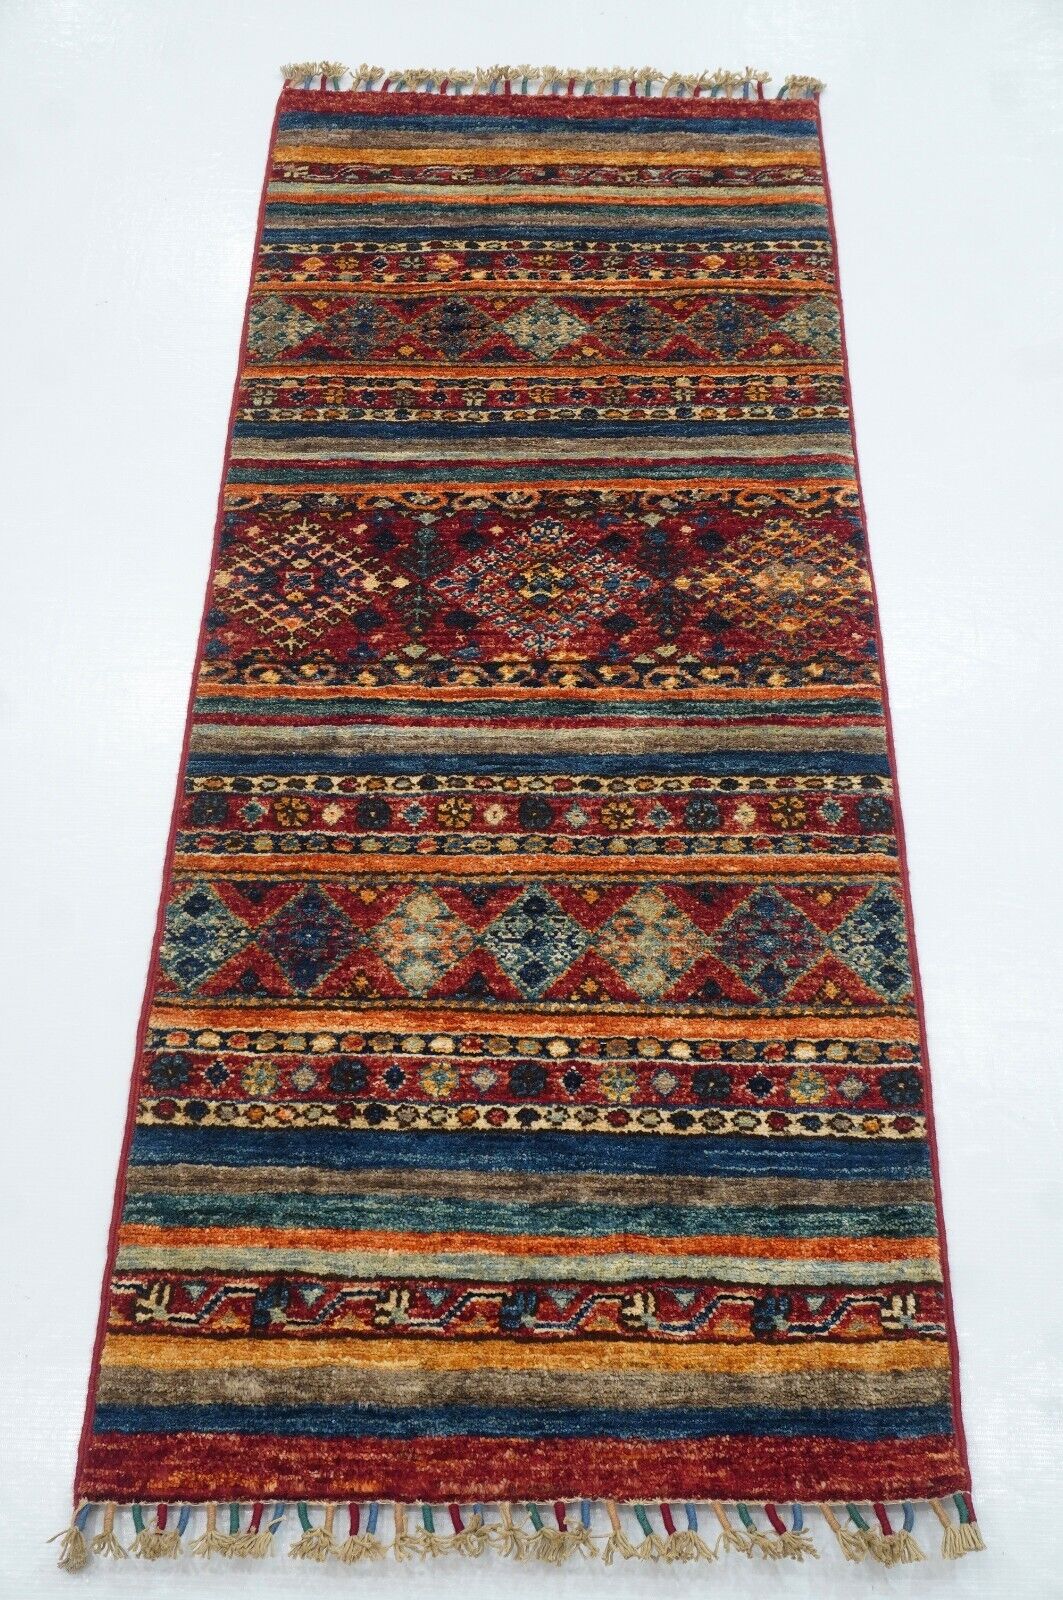 2 x 6 ft Red Striped Tribal Afghan Hand knotted Narrow Short Runner Rug